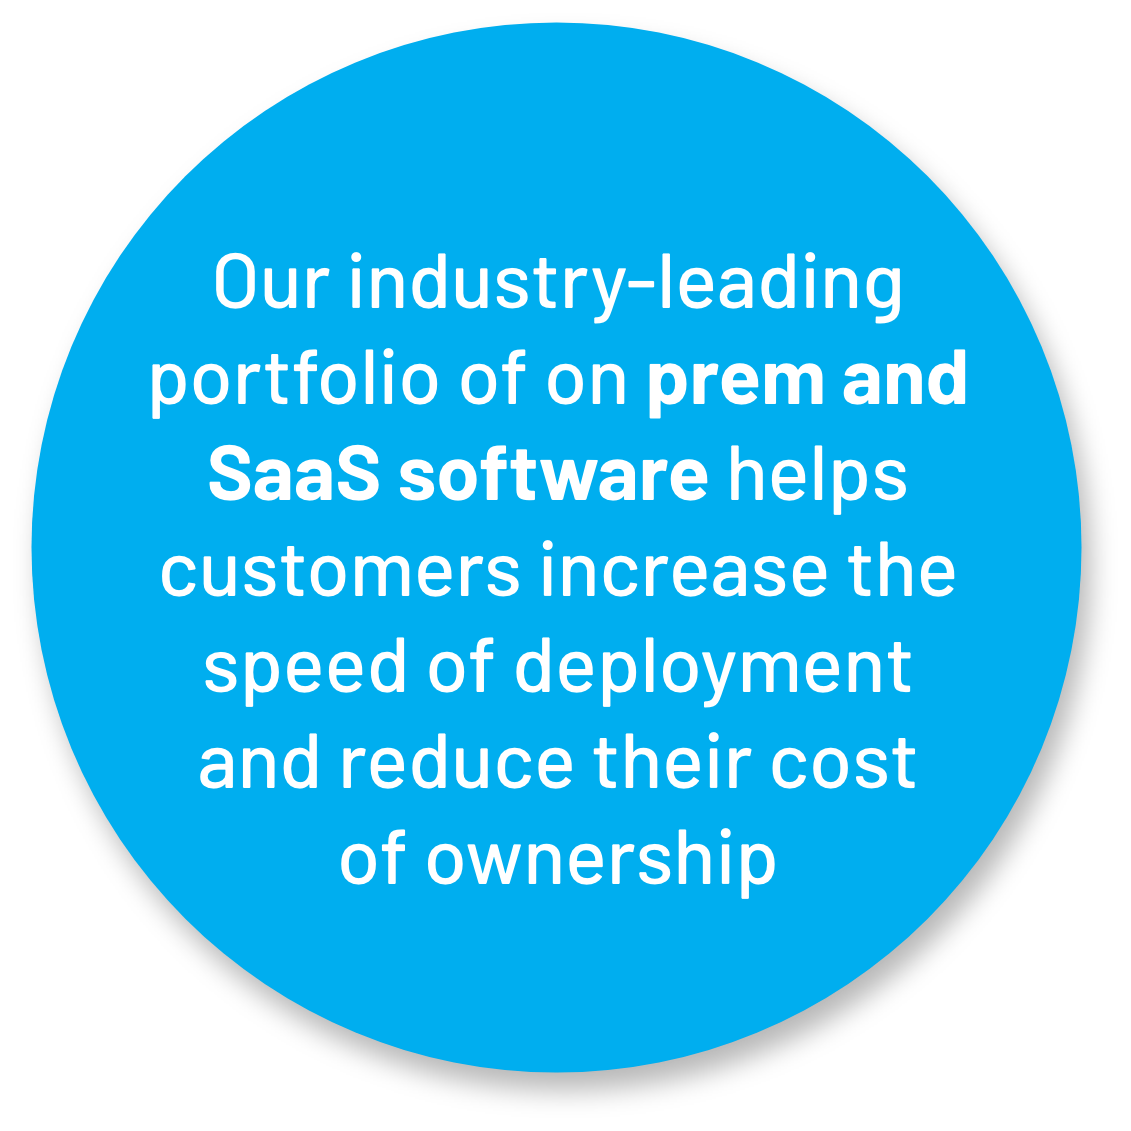 Our industry-leading portfolio of on-prem and Saas software helps customers increase the speed of deployment and reduce their cost of ownership.